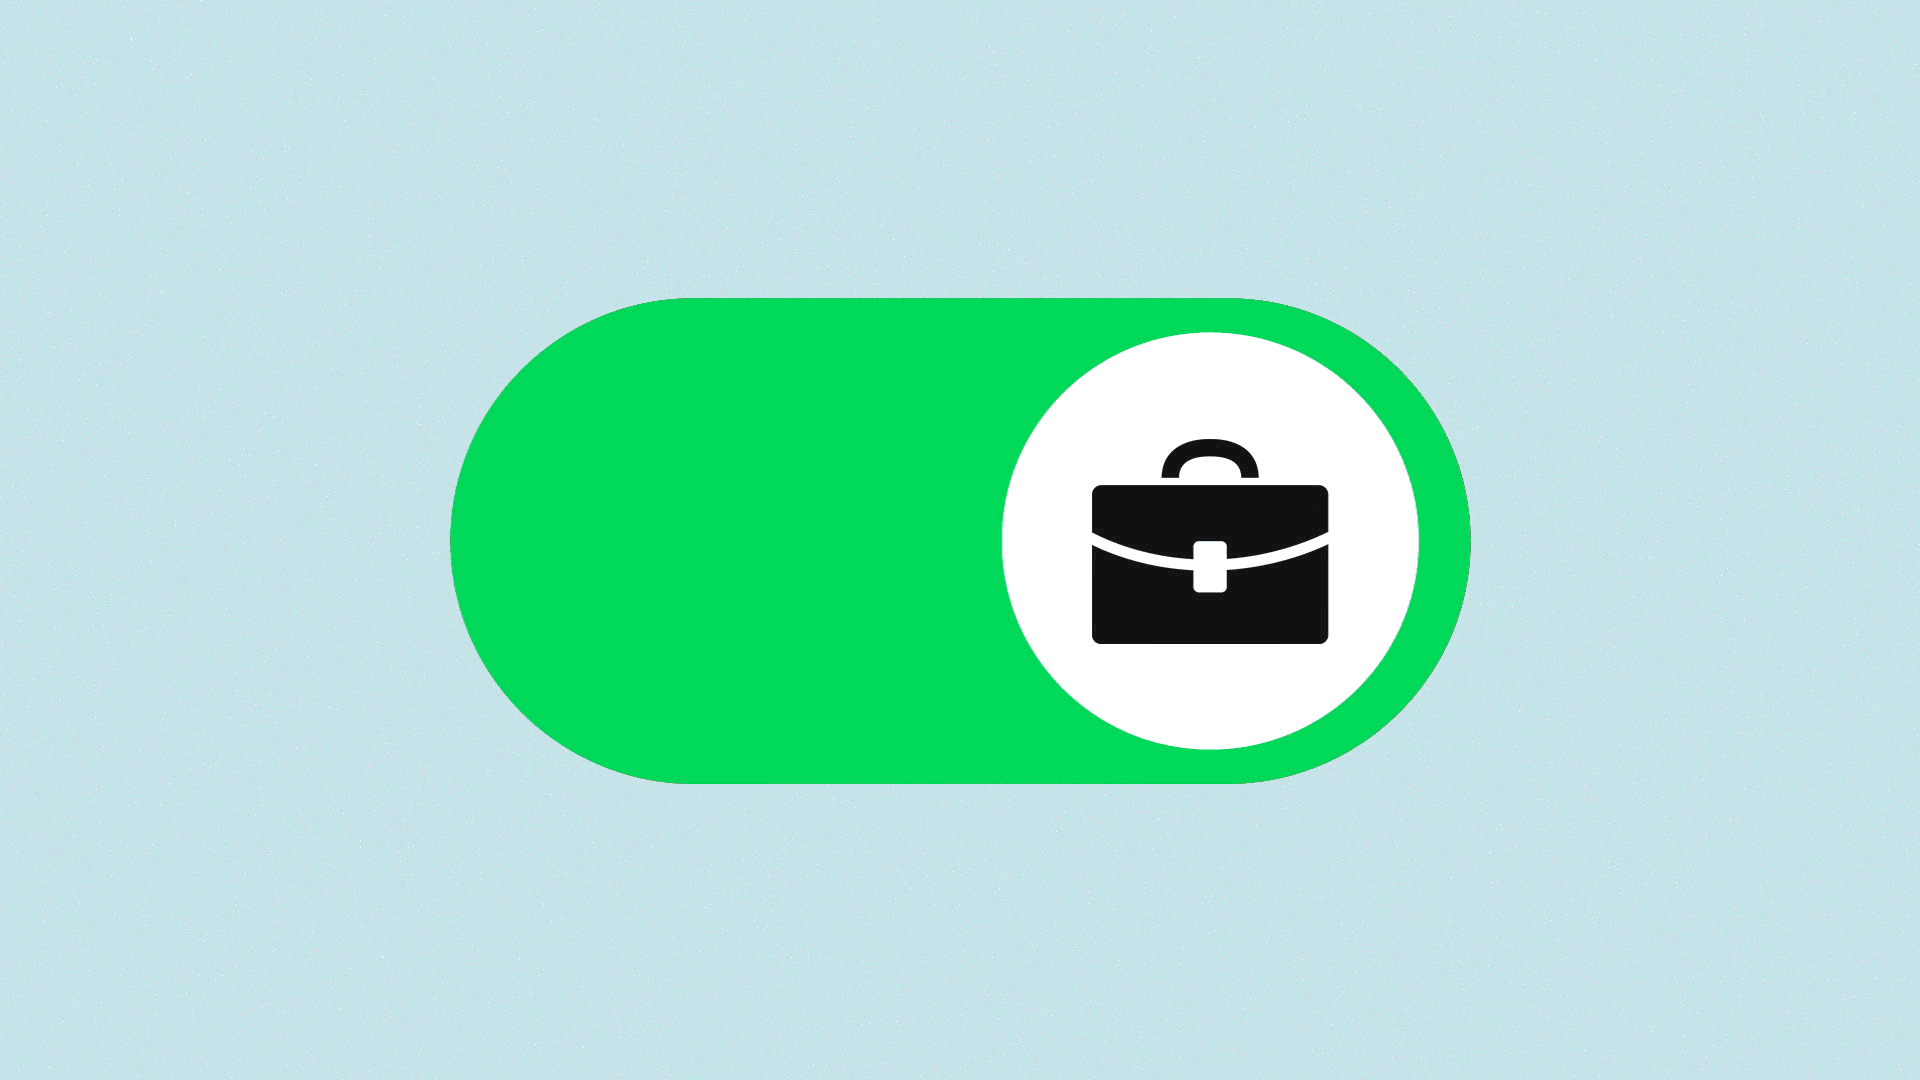 Illustration of a switch with a briefcase icon, shifting from on to off.